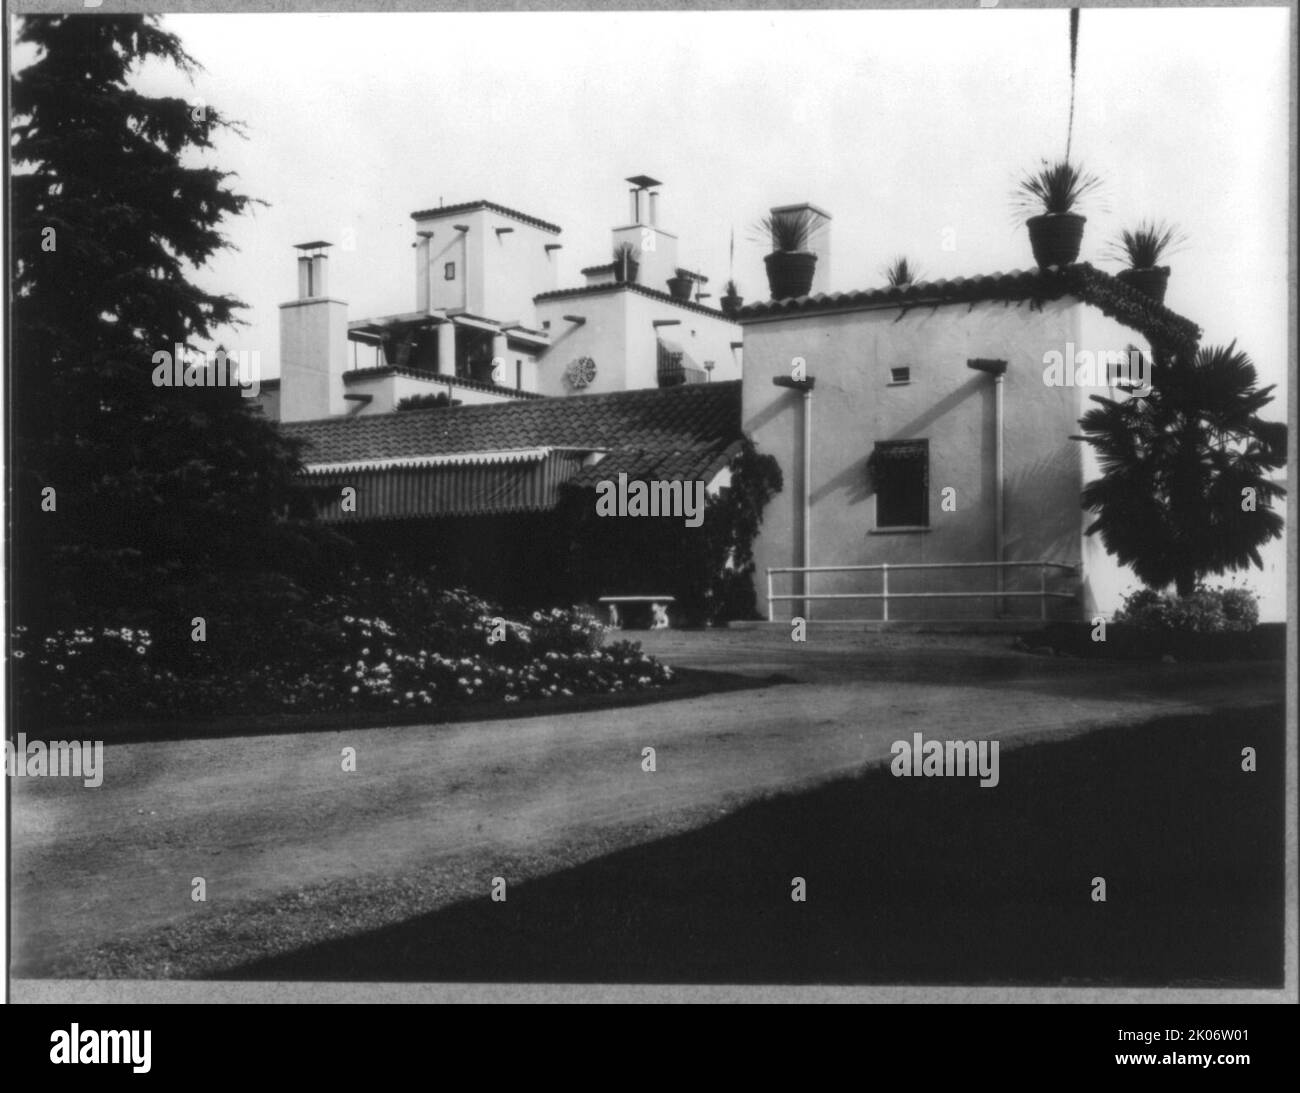 Mrs. Phoebe Apperson Hearst's home, Pleasanton, Cal.: exterior side, 1920s. Stock Photo